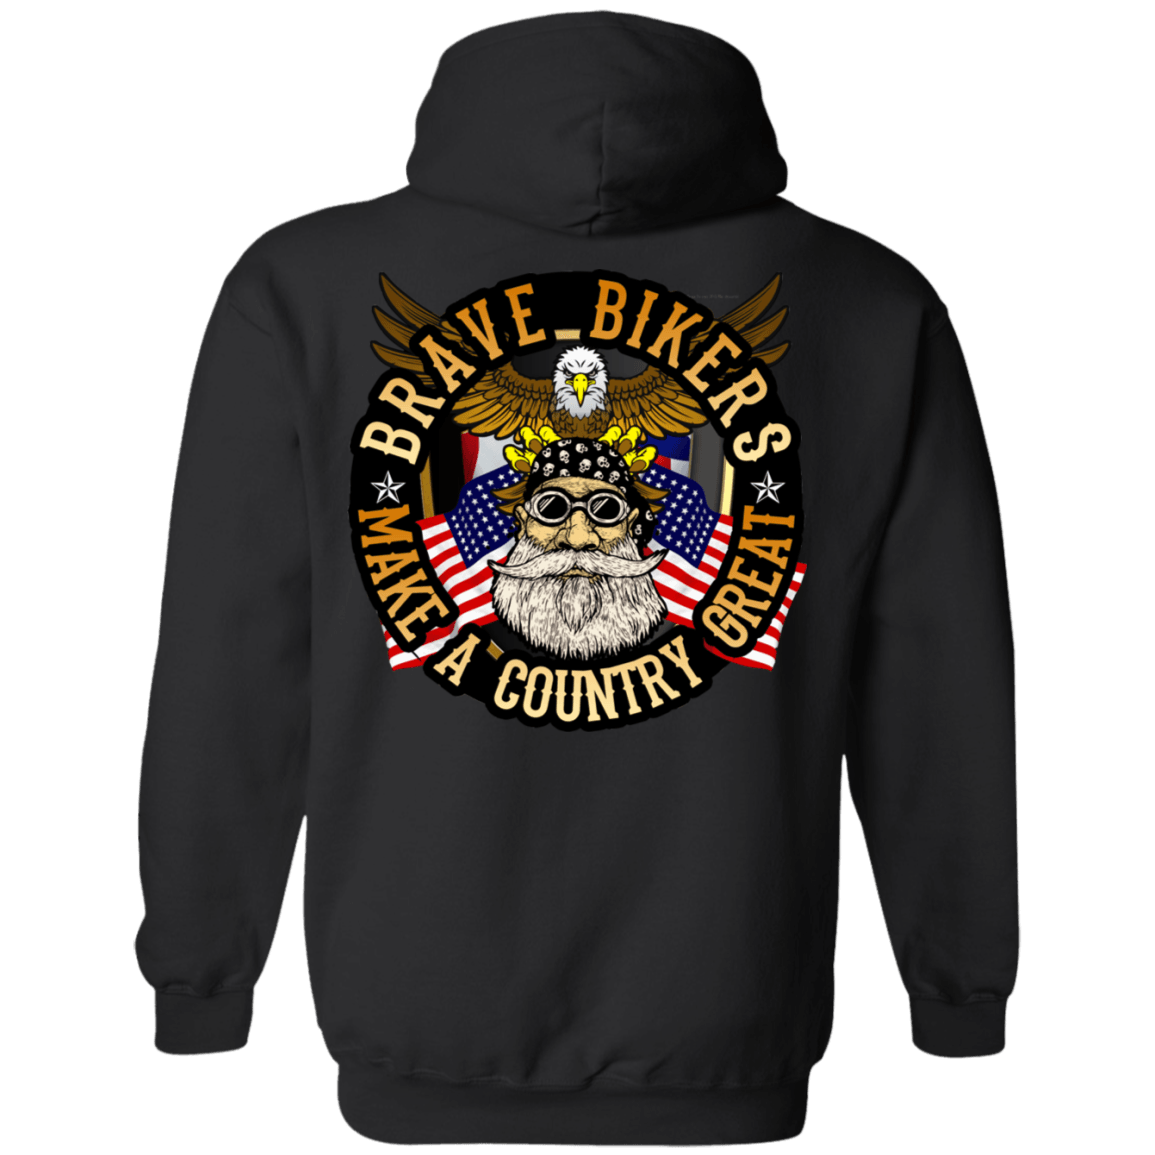 Bikers Make A Country Great Hoodie - American Legend Rider